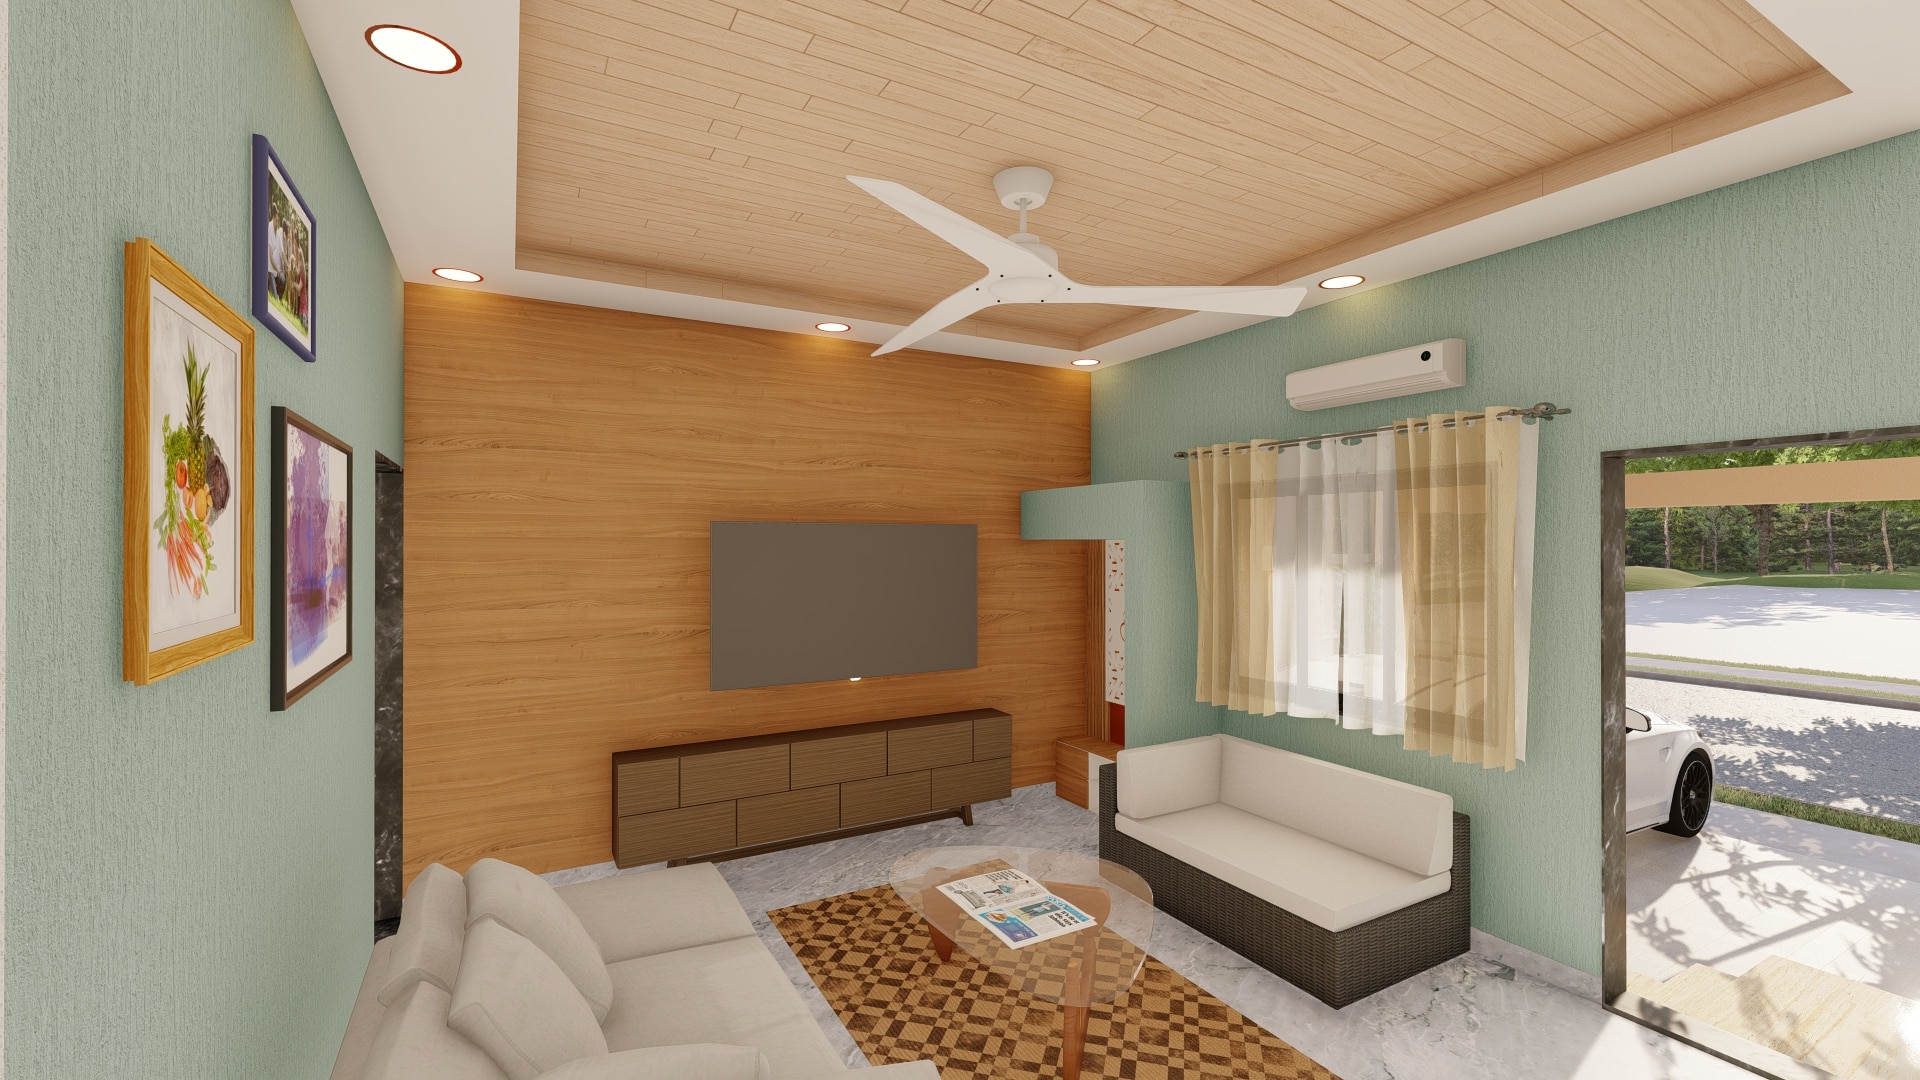 living room of luxury bungalow home design by urban terrace east facing 30x50 sq ft